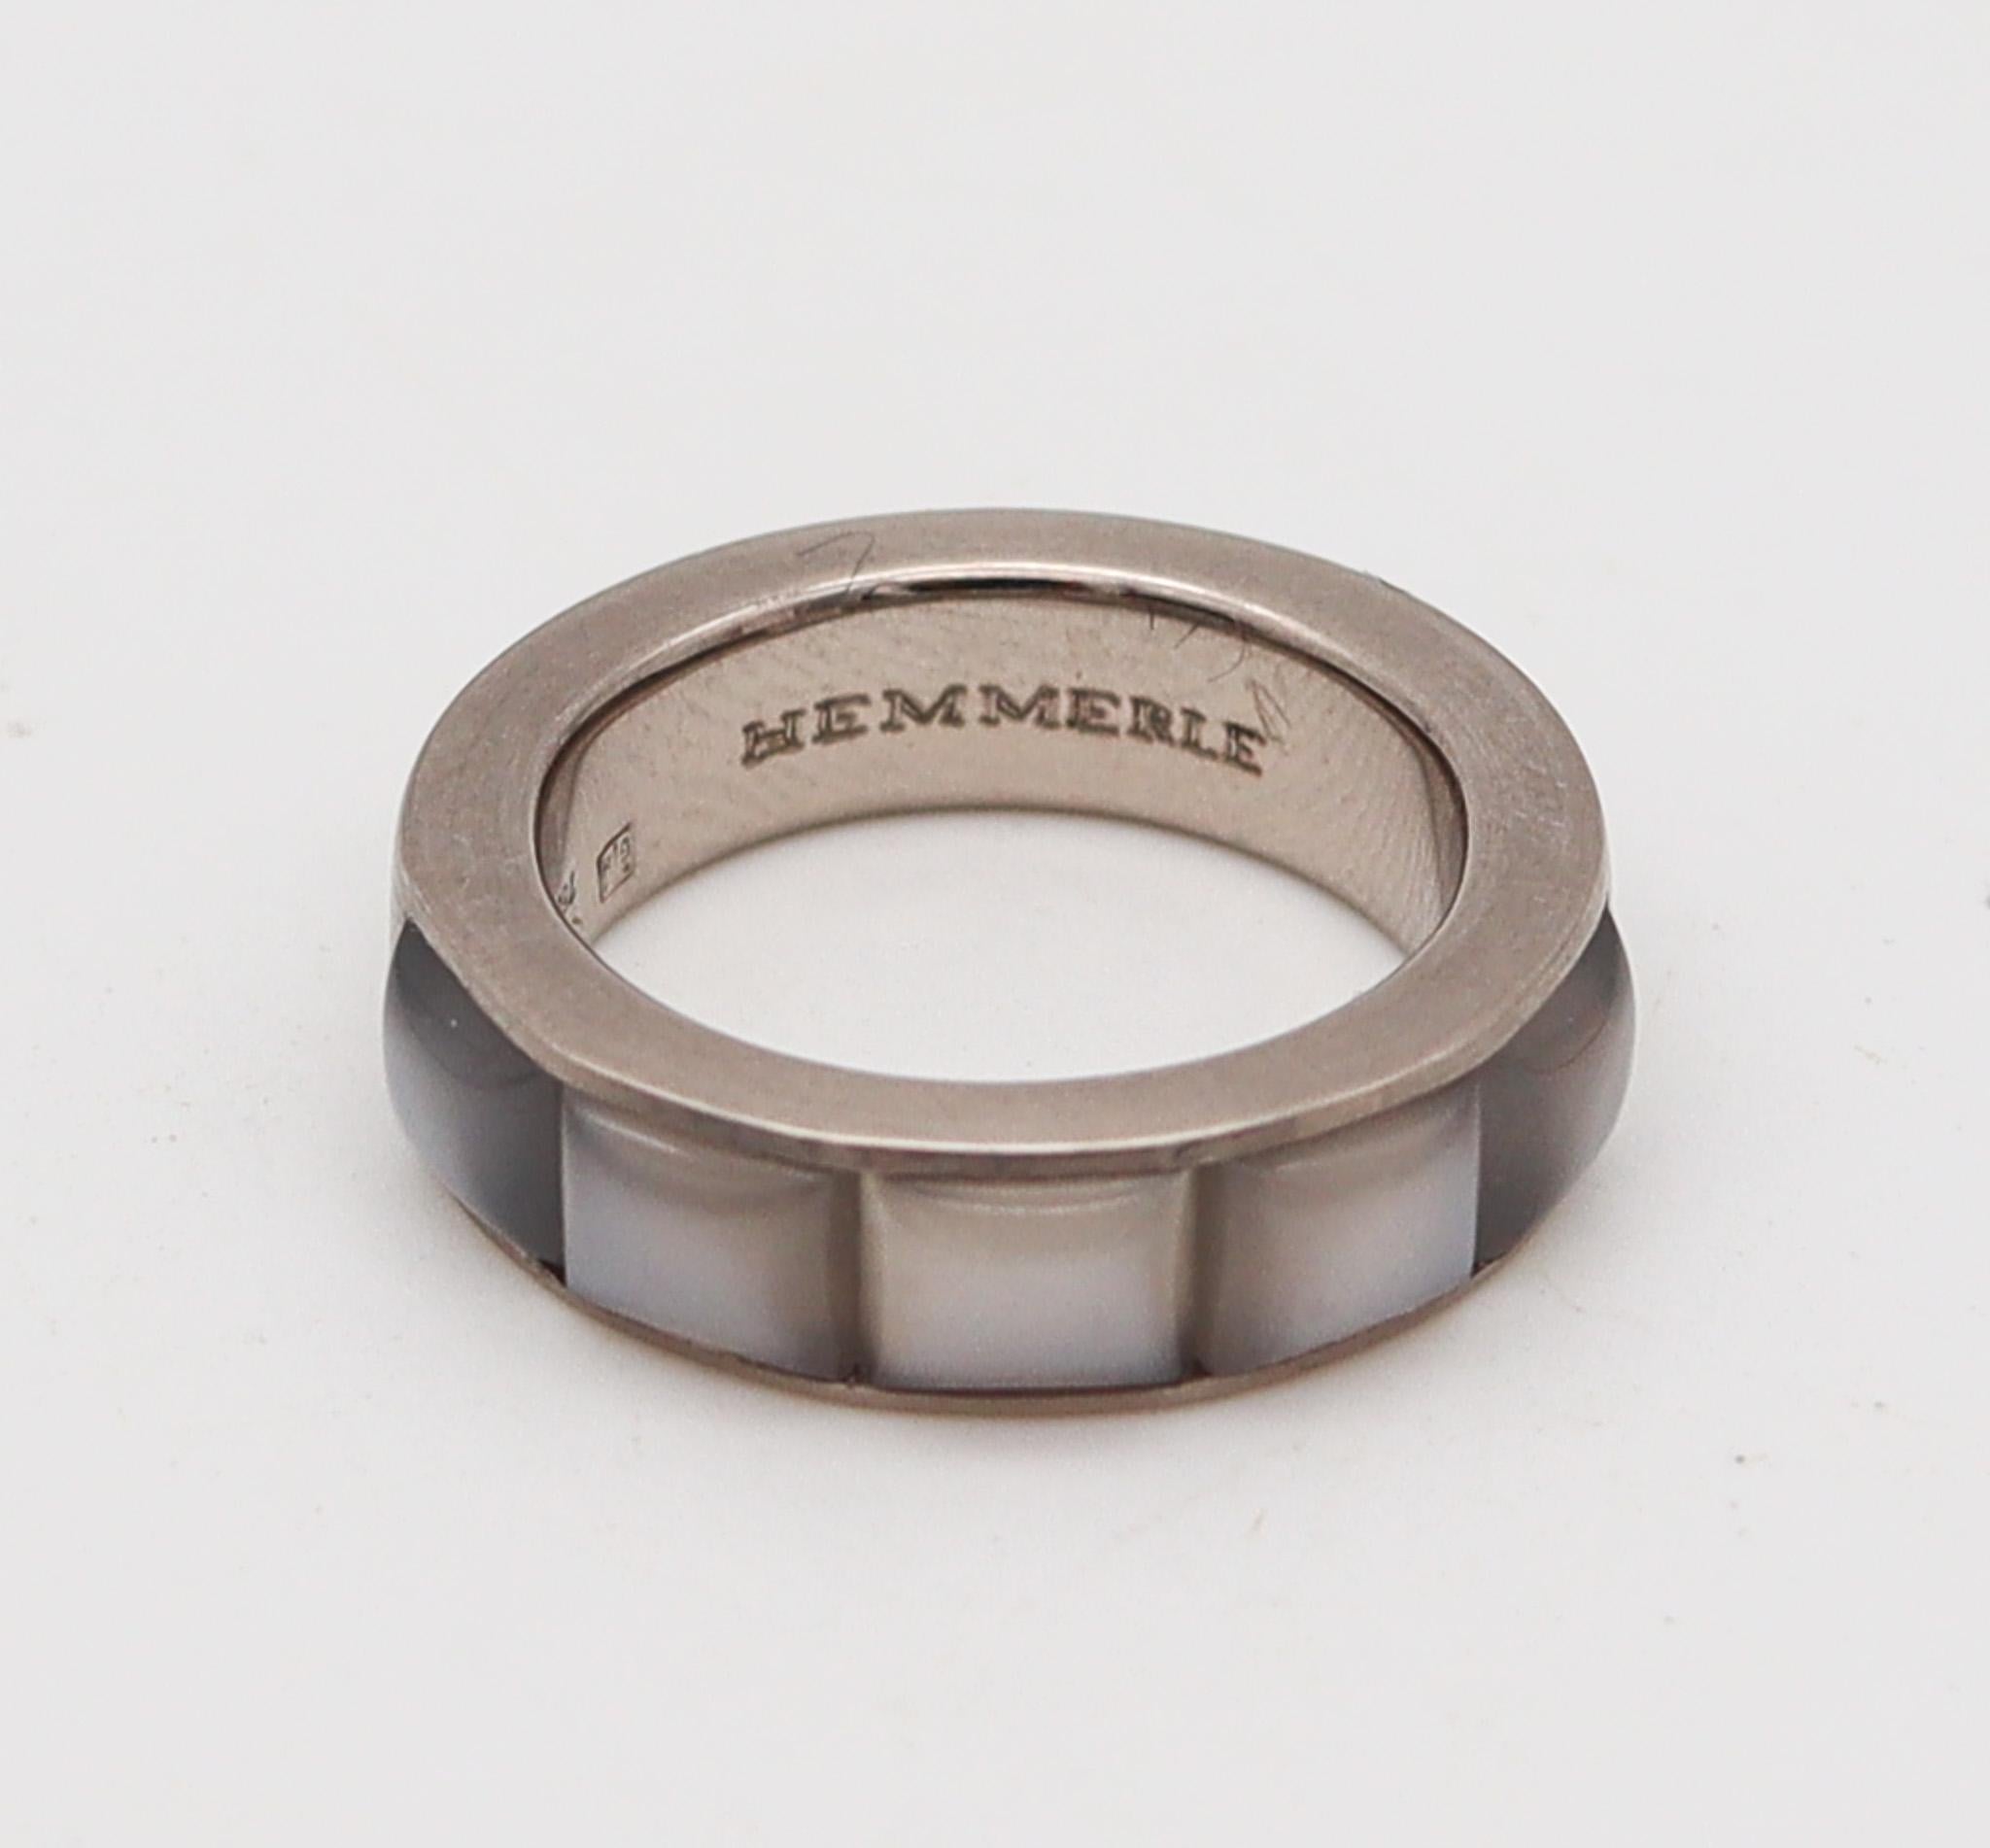 A ring band designed by Hemmerle.

Beautiful half eternity band, created in Munich Germany by the jewelry house of Hemmerle, back in the 1990's. This gorgeous ring has been carefully crafted in solid white gold of 18 karats with a delicate thin